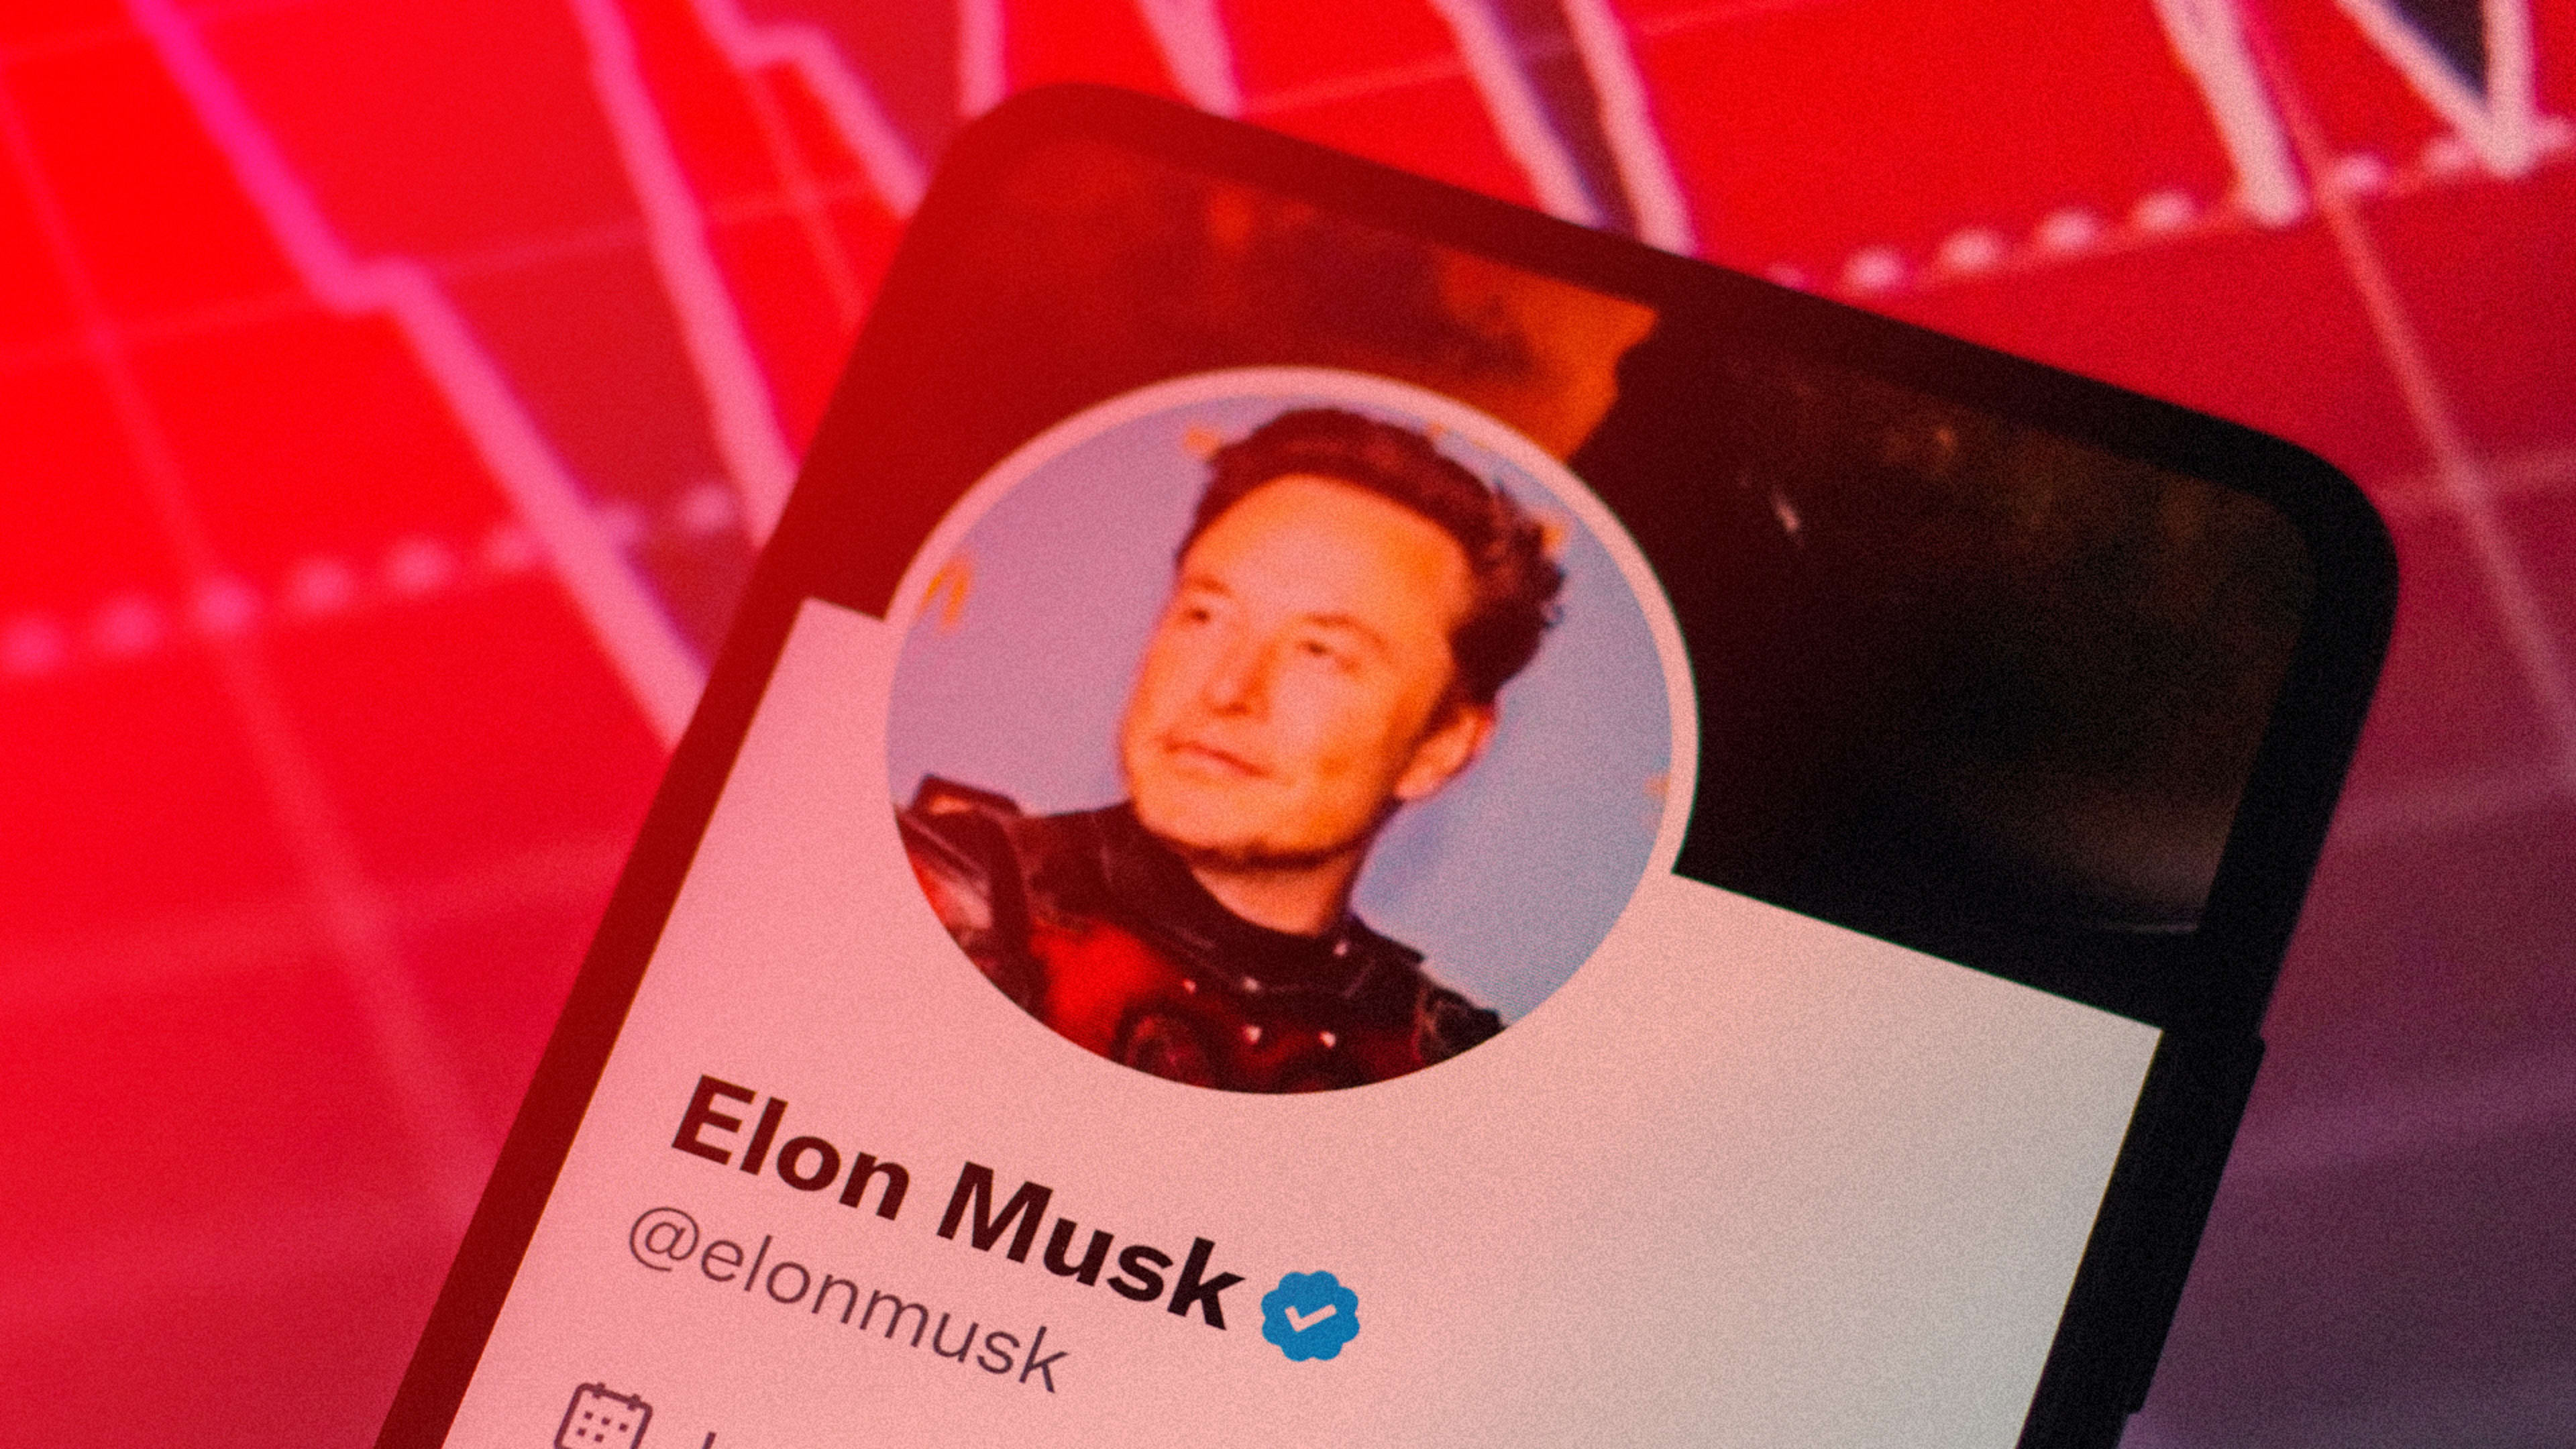 Elon Musk’s Kanye West fiasco highlights the content moderation dangers Twitter now faces